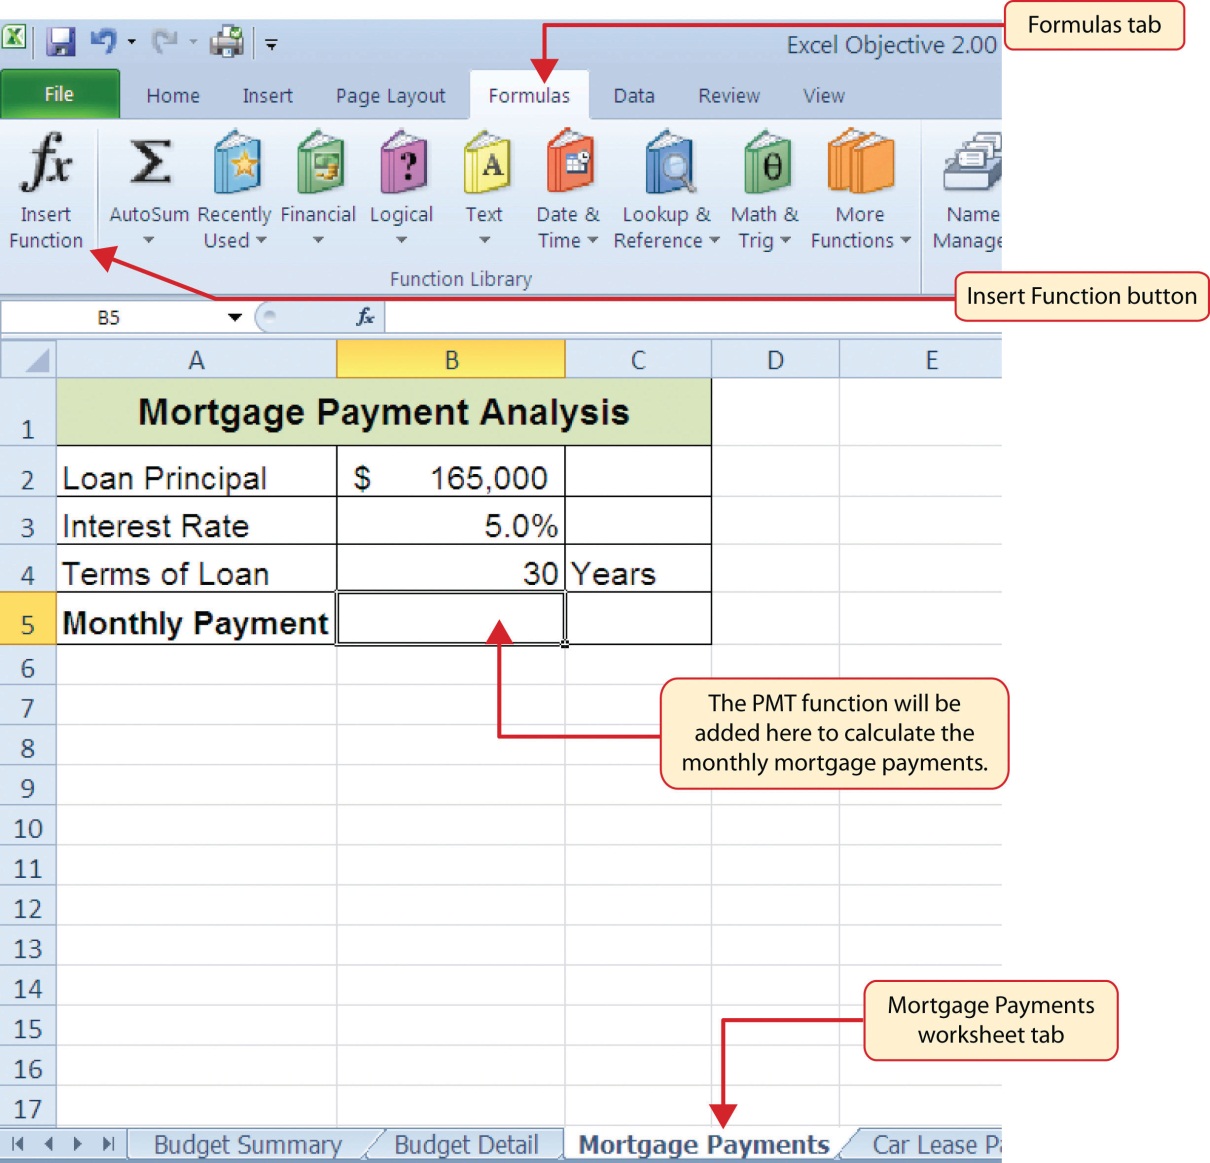 Mortgage Payments worksheet. Formulas tab shows Insert Function button. The PMT function will be added to cell B:5 to calculate monthly mortgage payments.